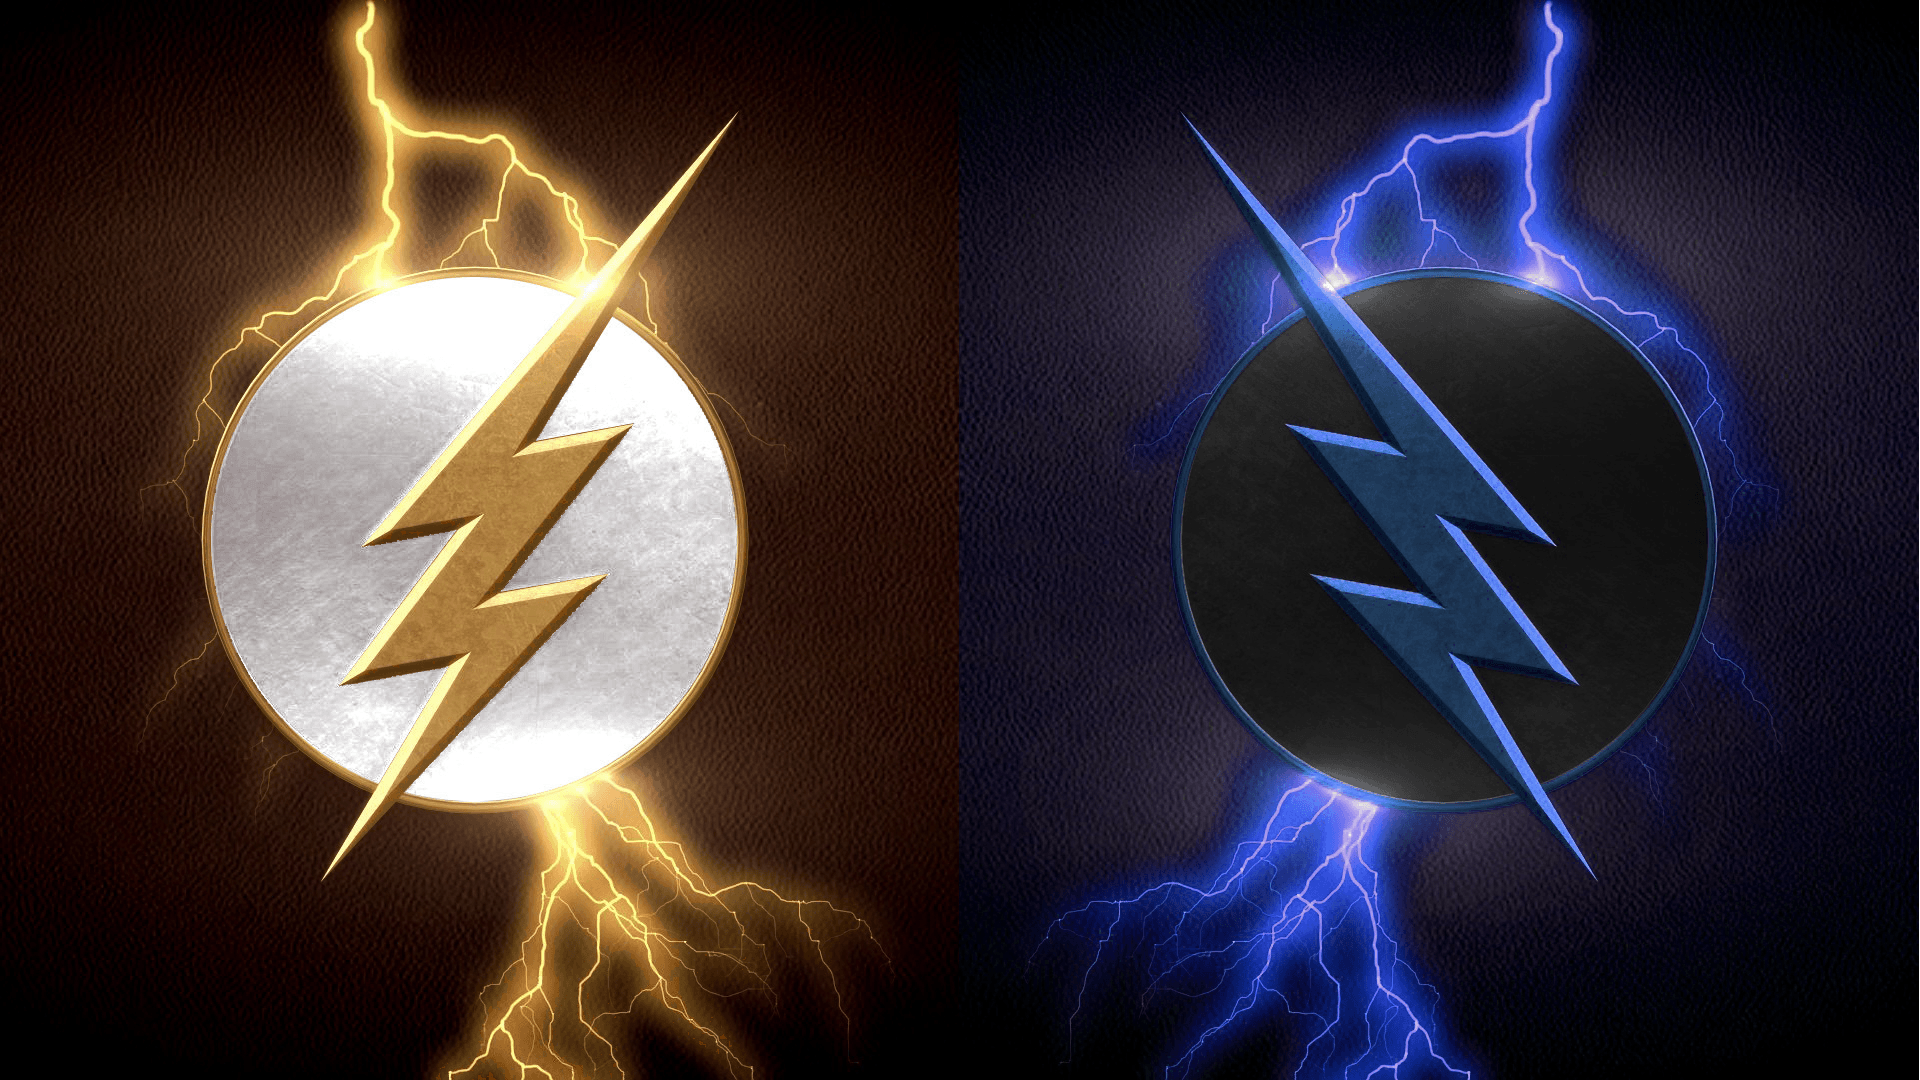 Zoom The Flash Wallpaper. Flash wallpaper, Zoom the flash, Background image hd